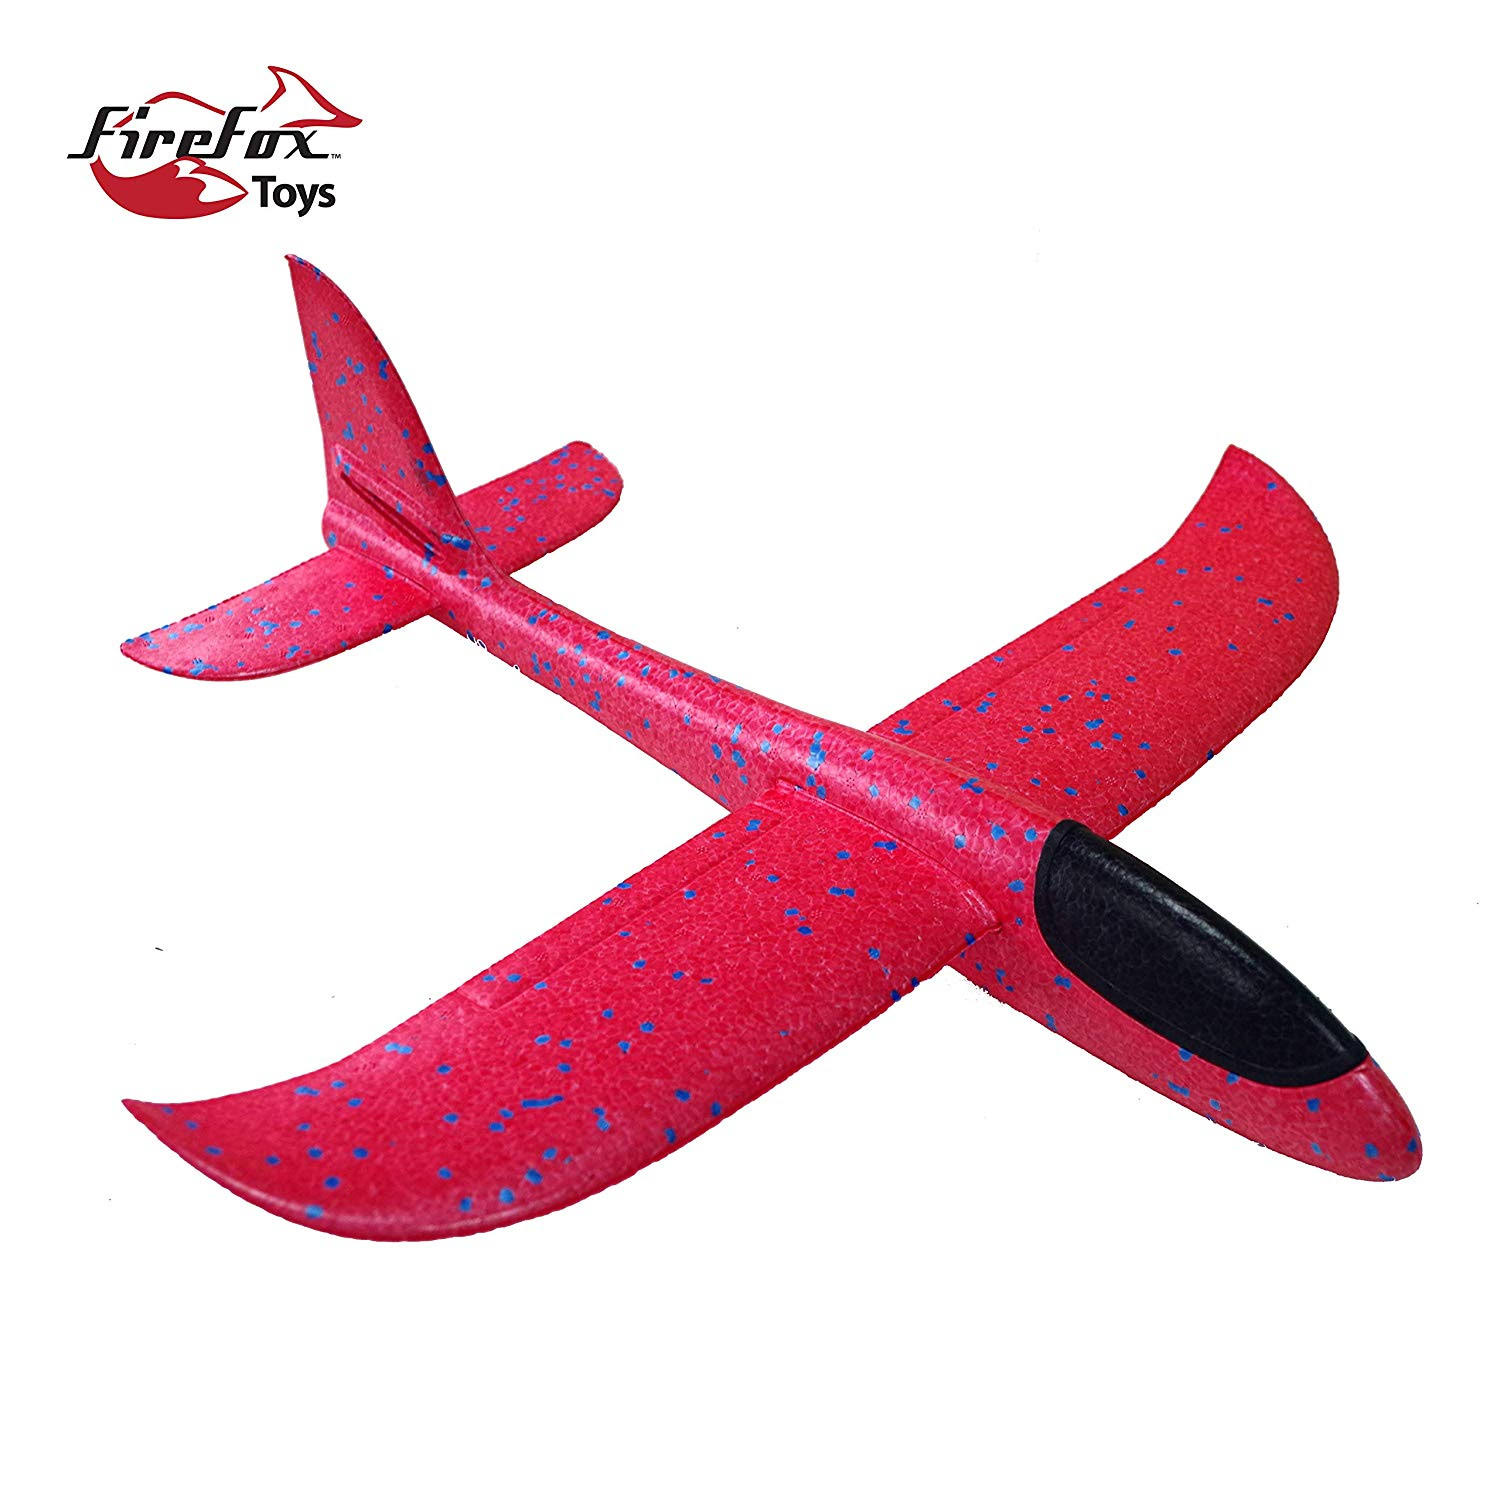 Firefox Toys Trixter Hand Glider | Firefox Toys | Collectibles